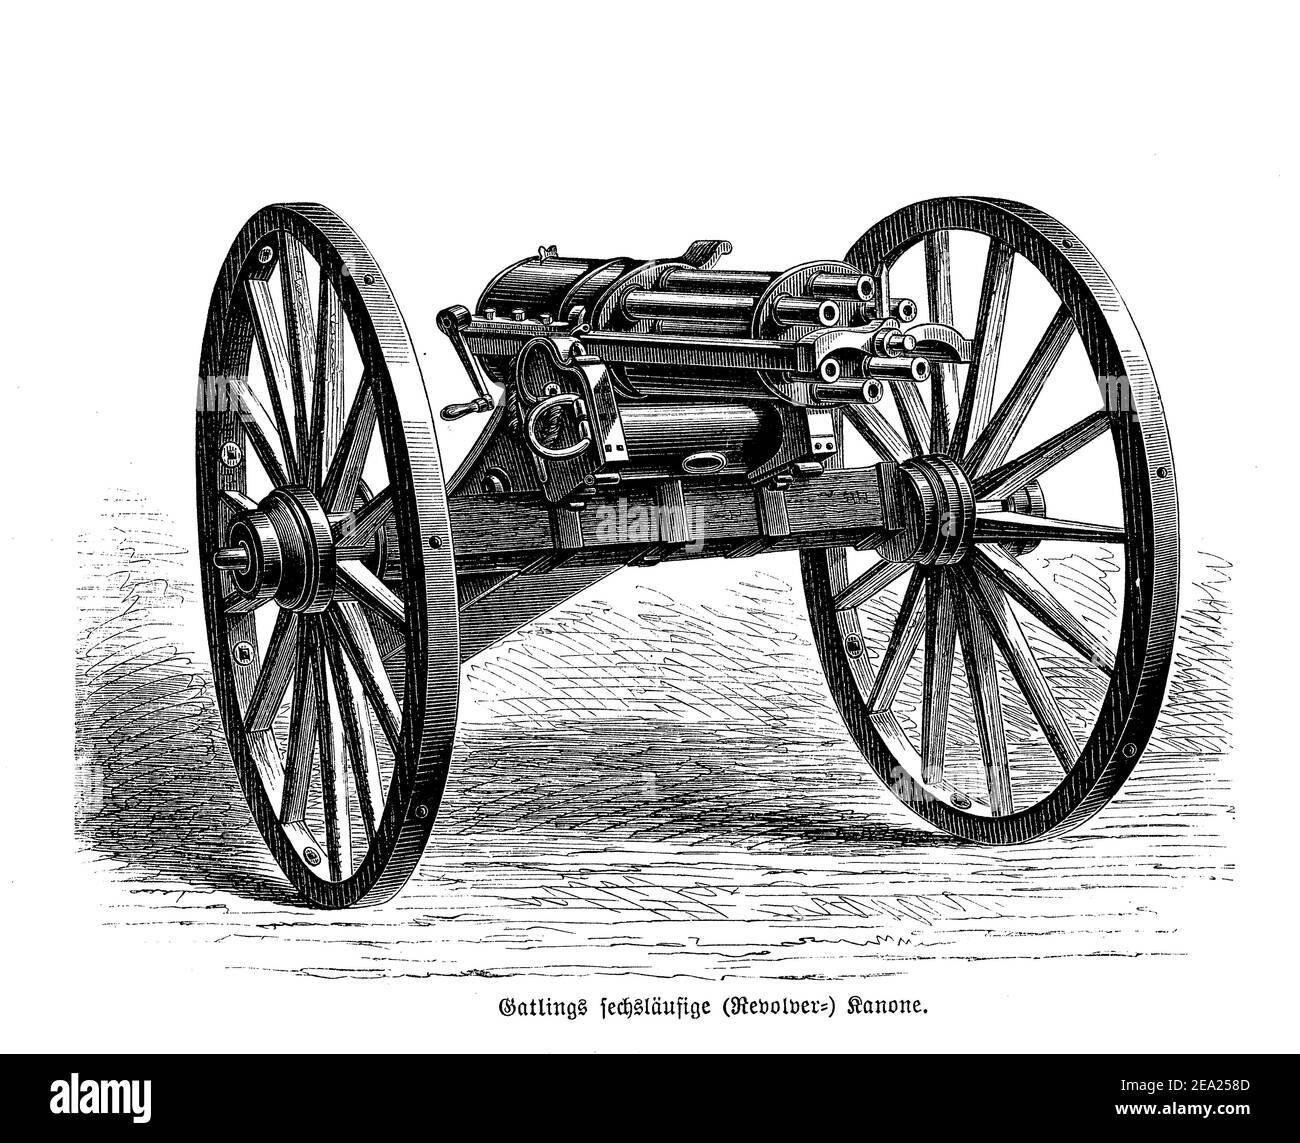 Gatling rapid-firing multiple-barrel machine gun invented in 1861 by Richard Jordan Gatling,  each barrel sequentially loads a single round of cartridge and fires off the shot as a revolver cannon Stock Photo